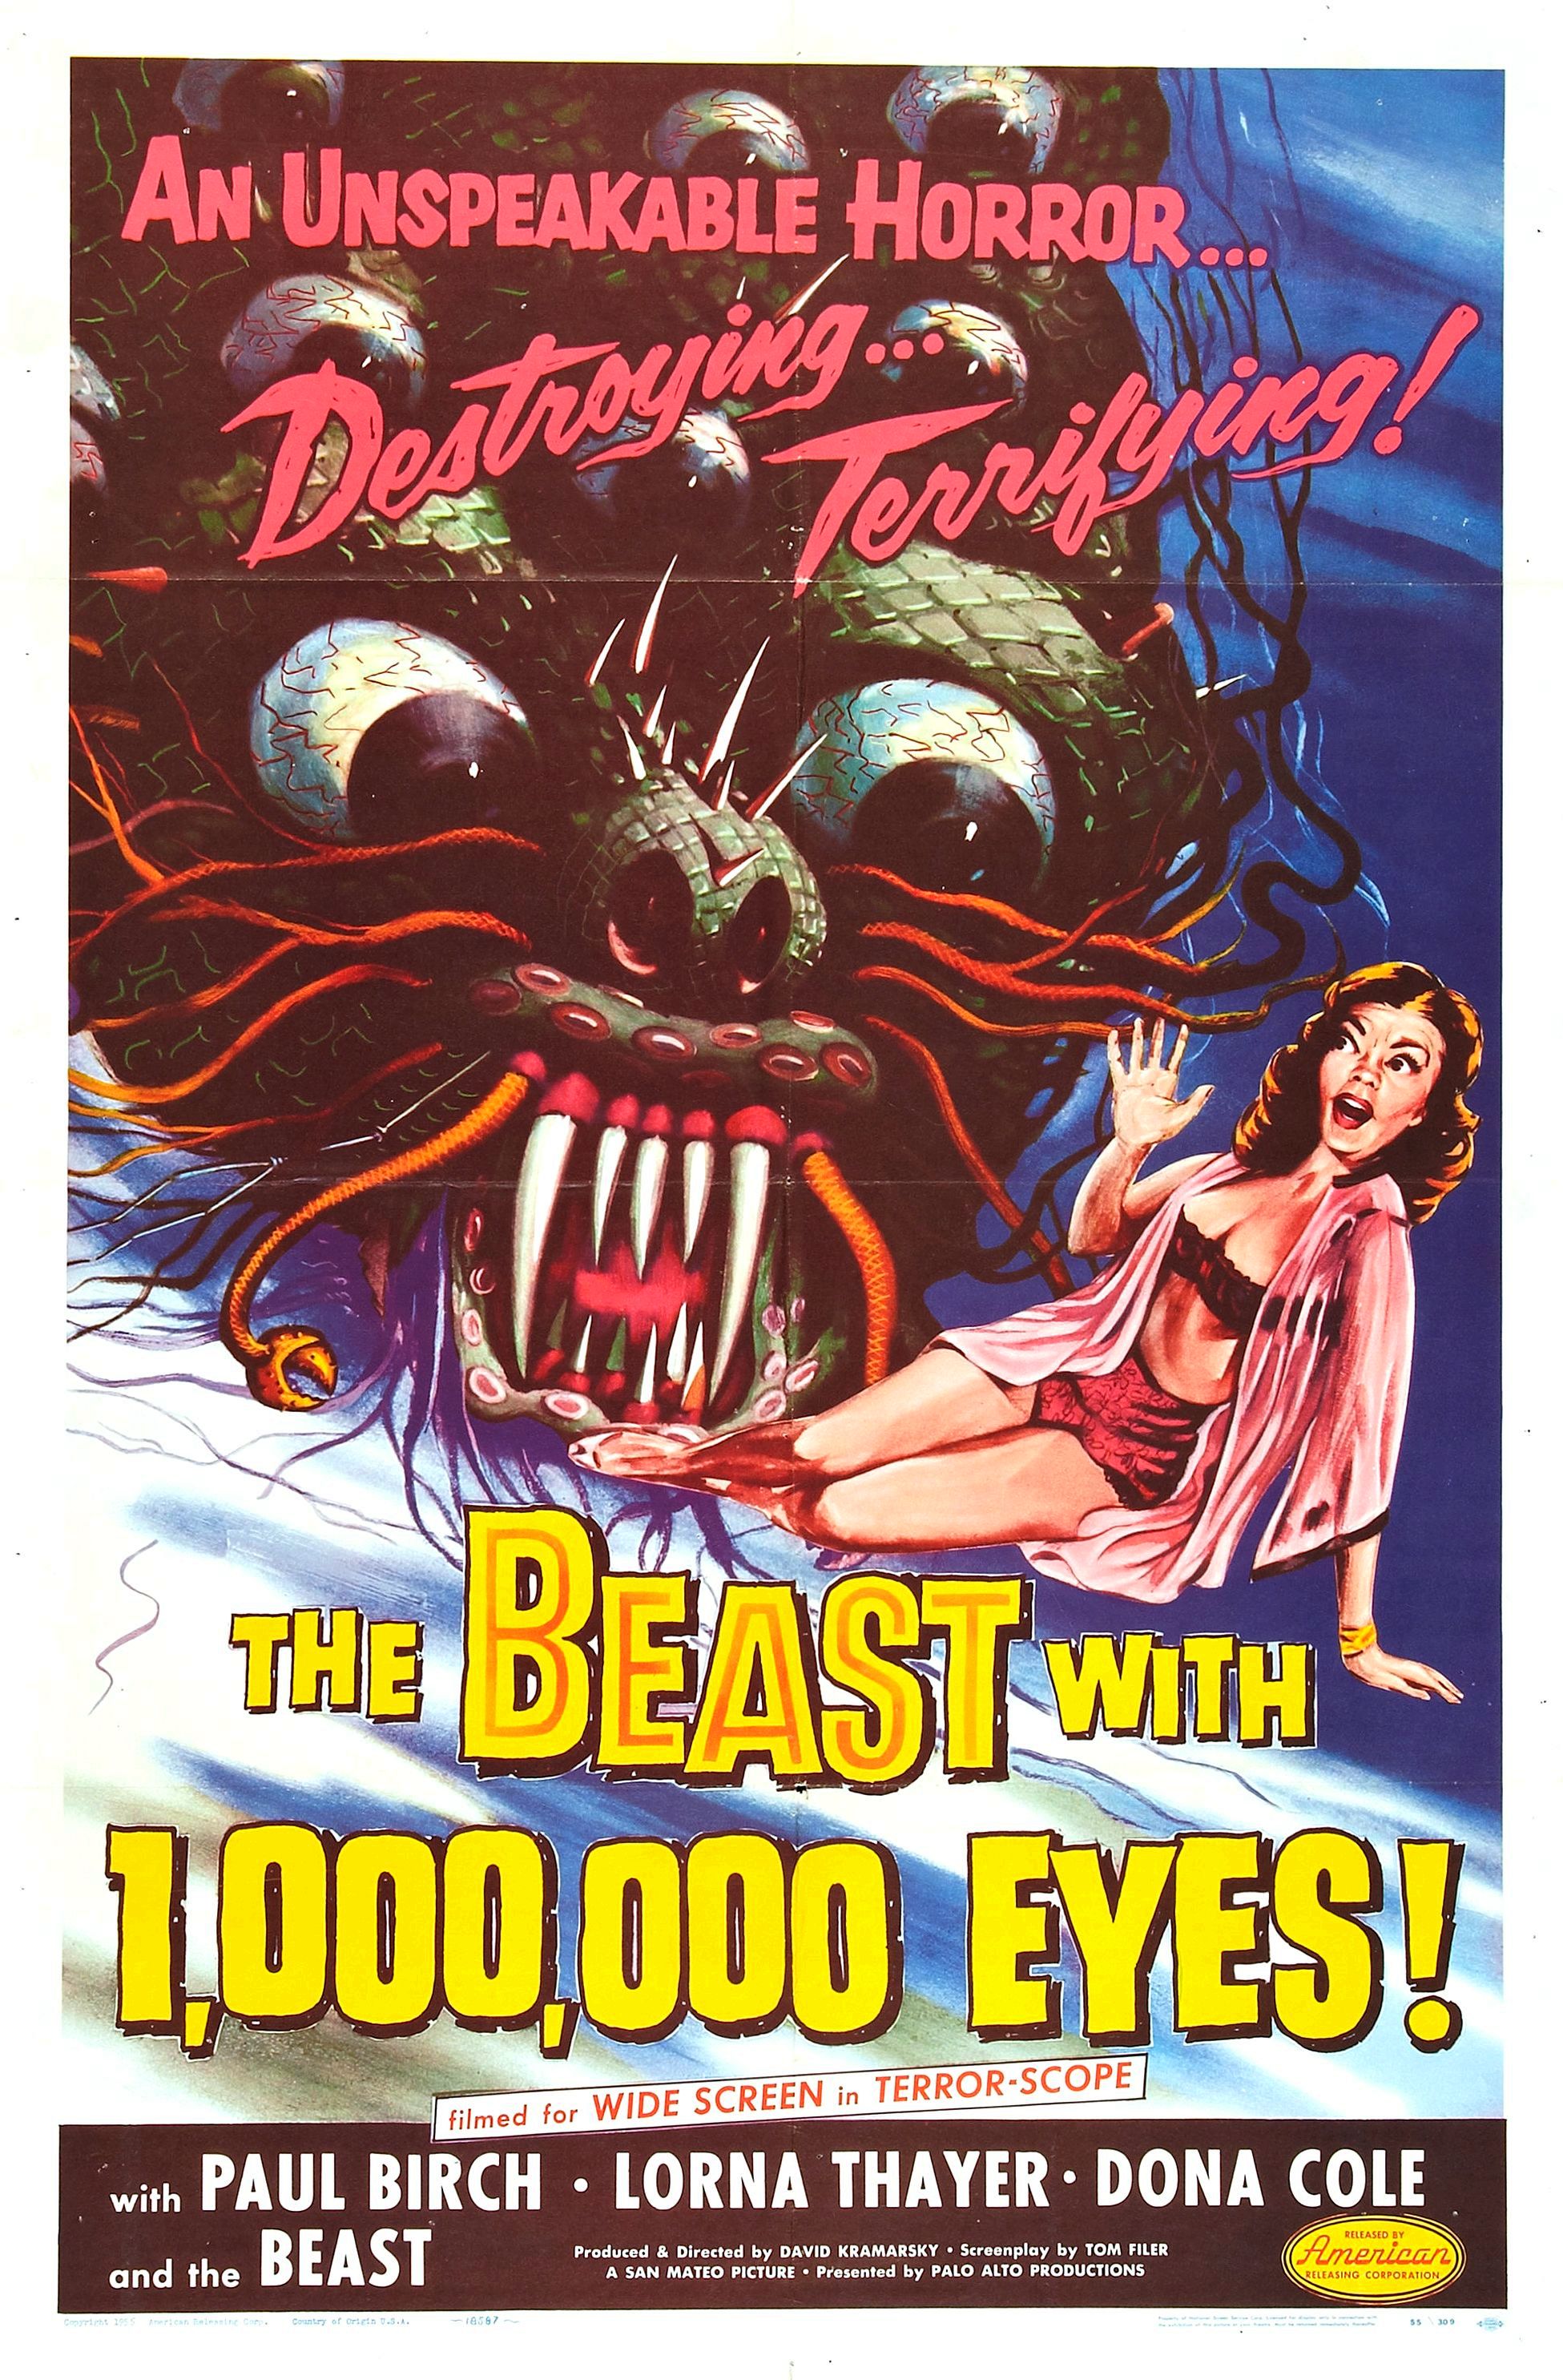 The Beast with 1,000,000 Eyes (1955)